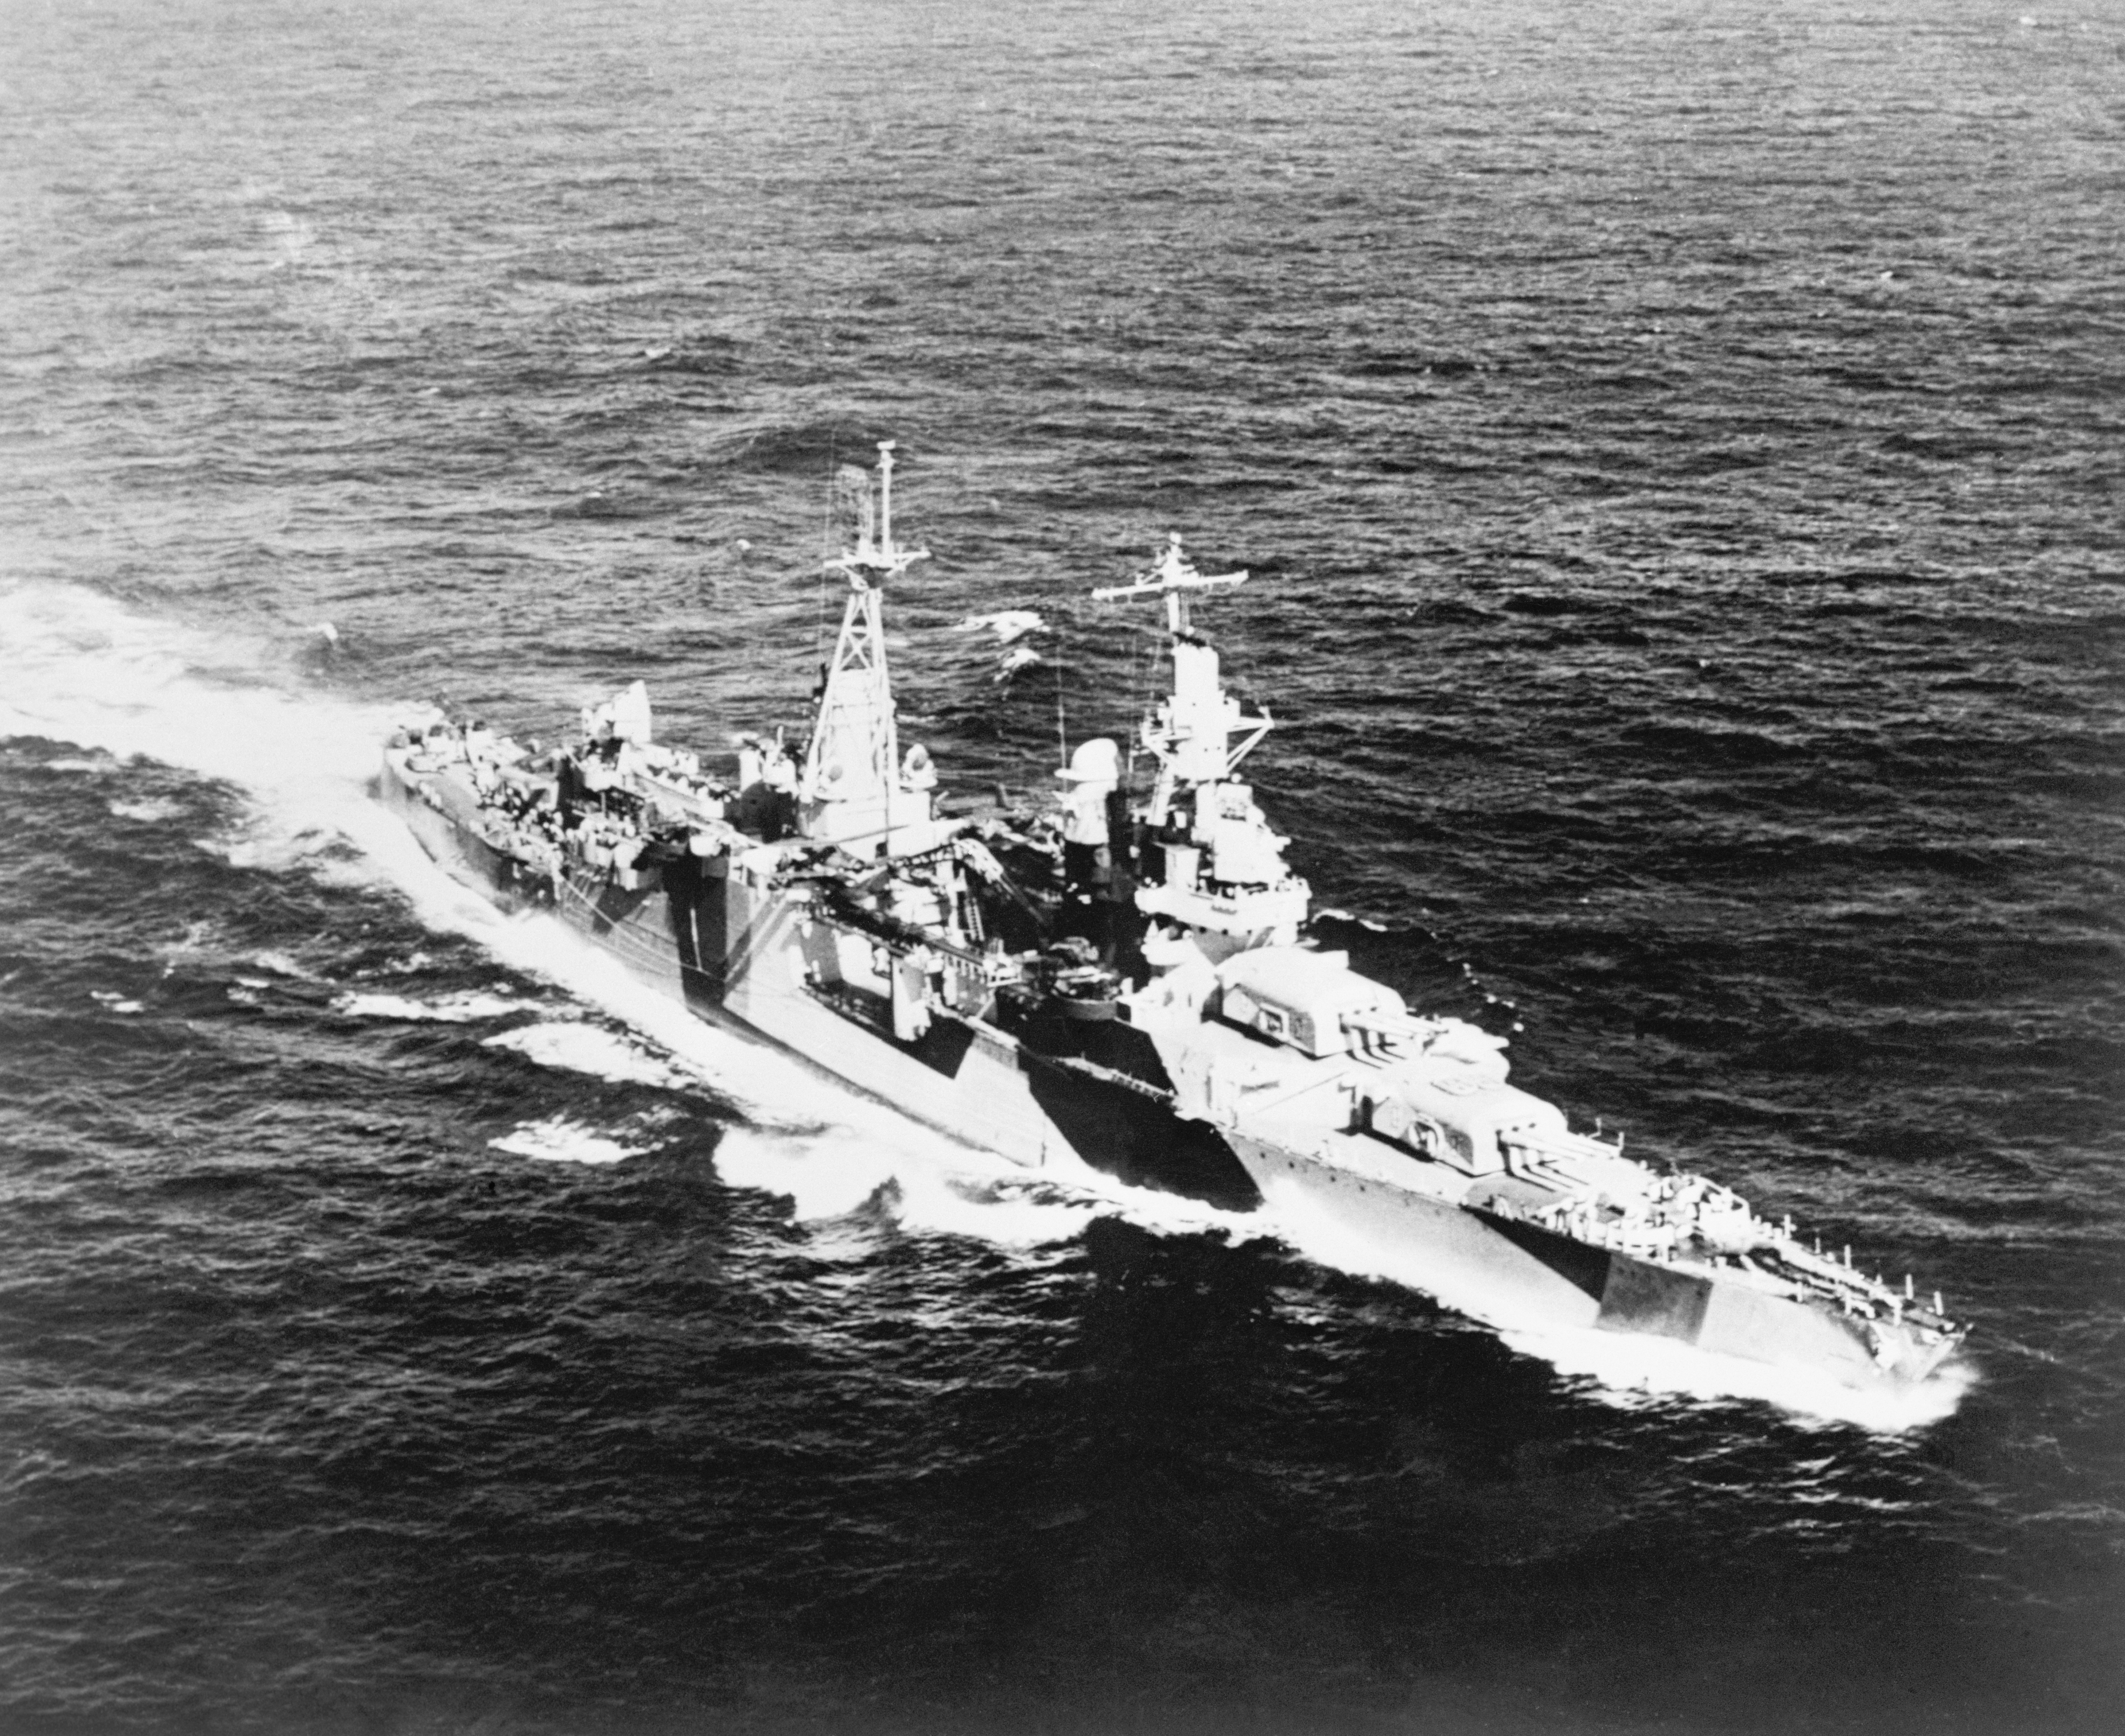 Black and white image showing the USS Indianapolis, a Navy cruiser, sailing at sea